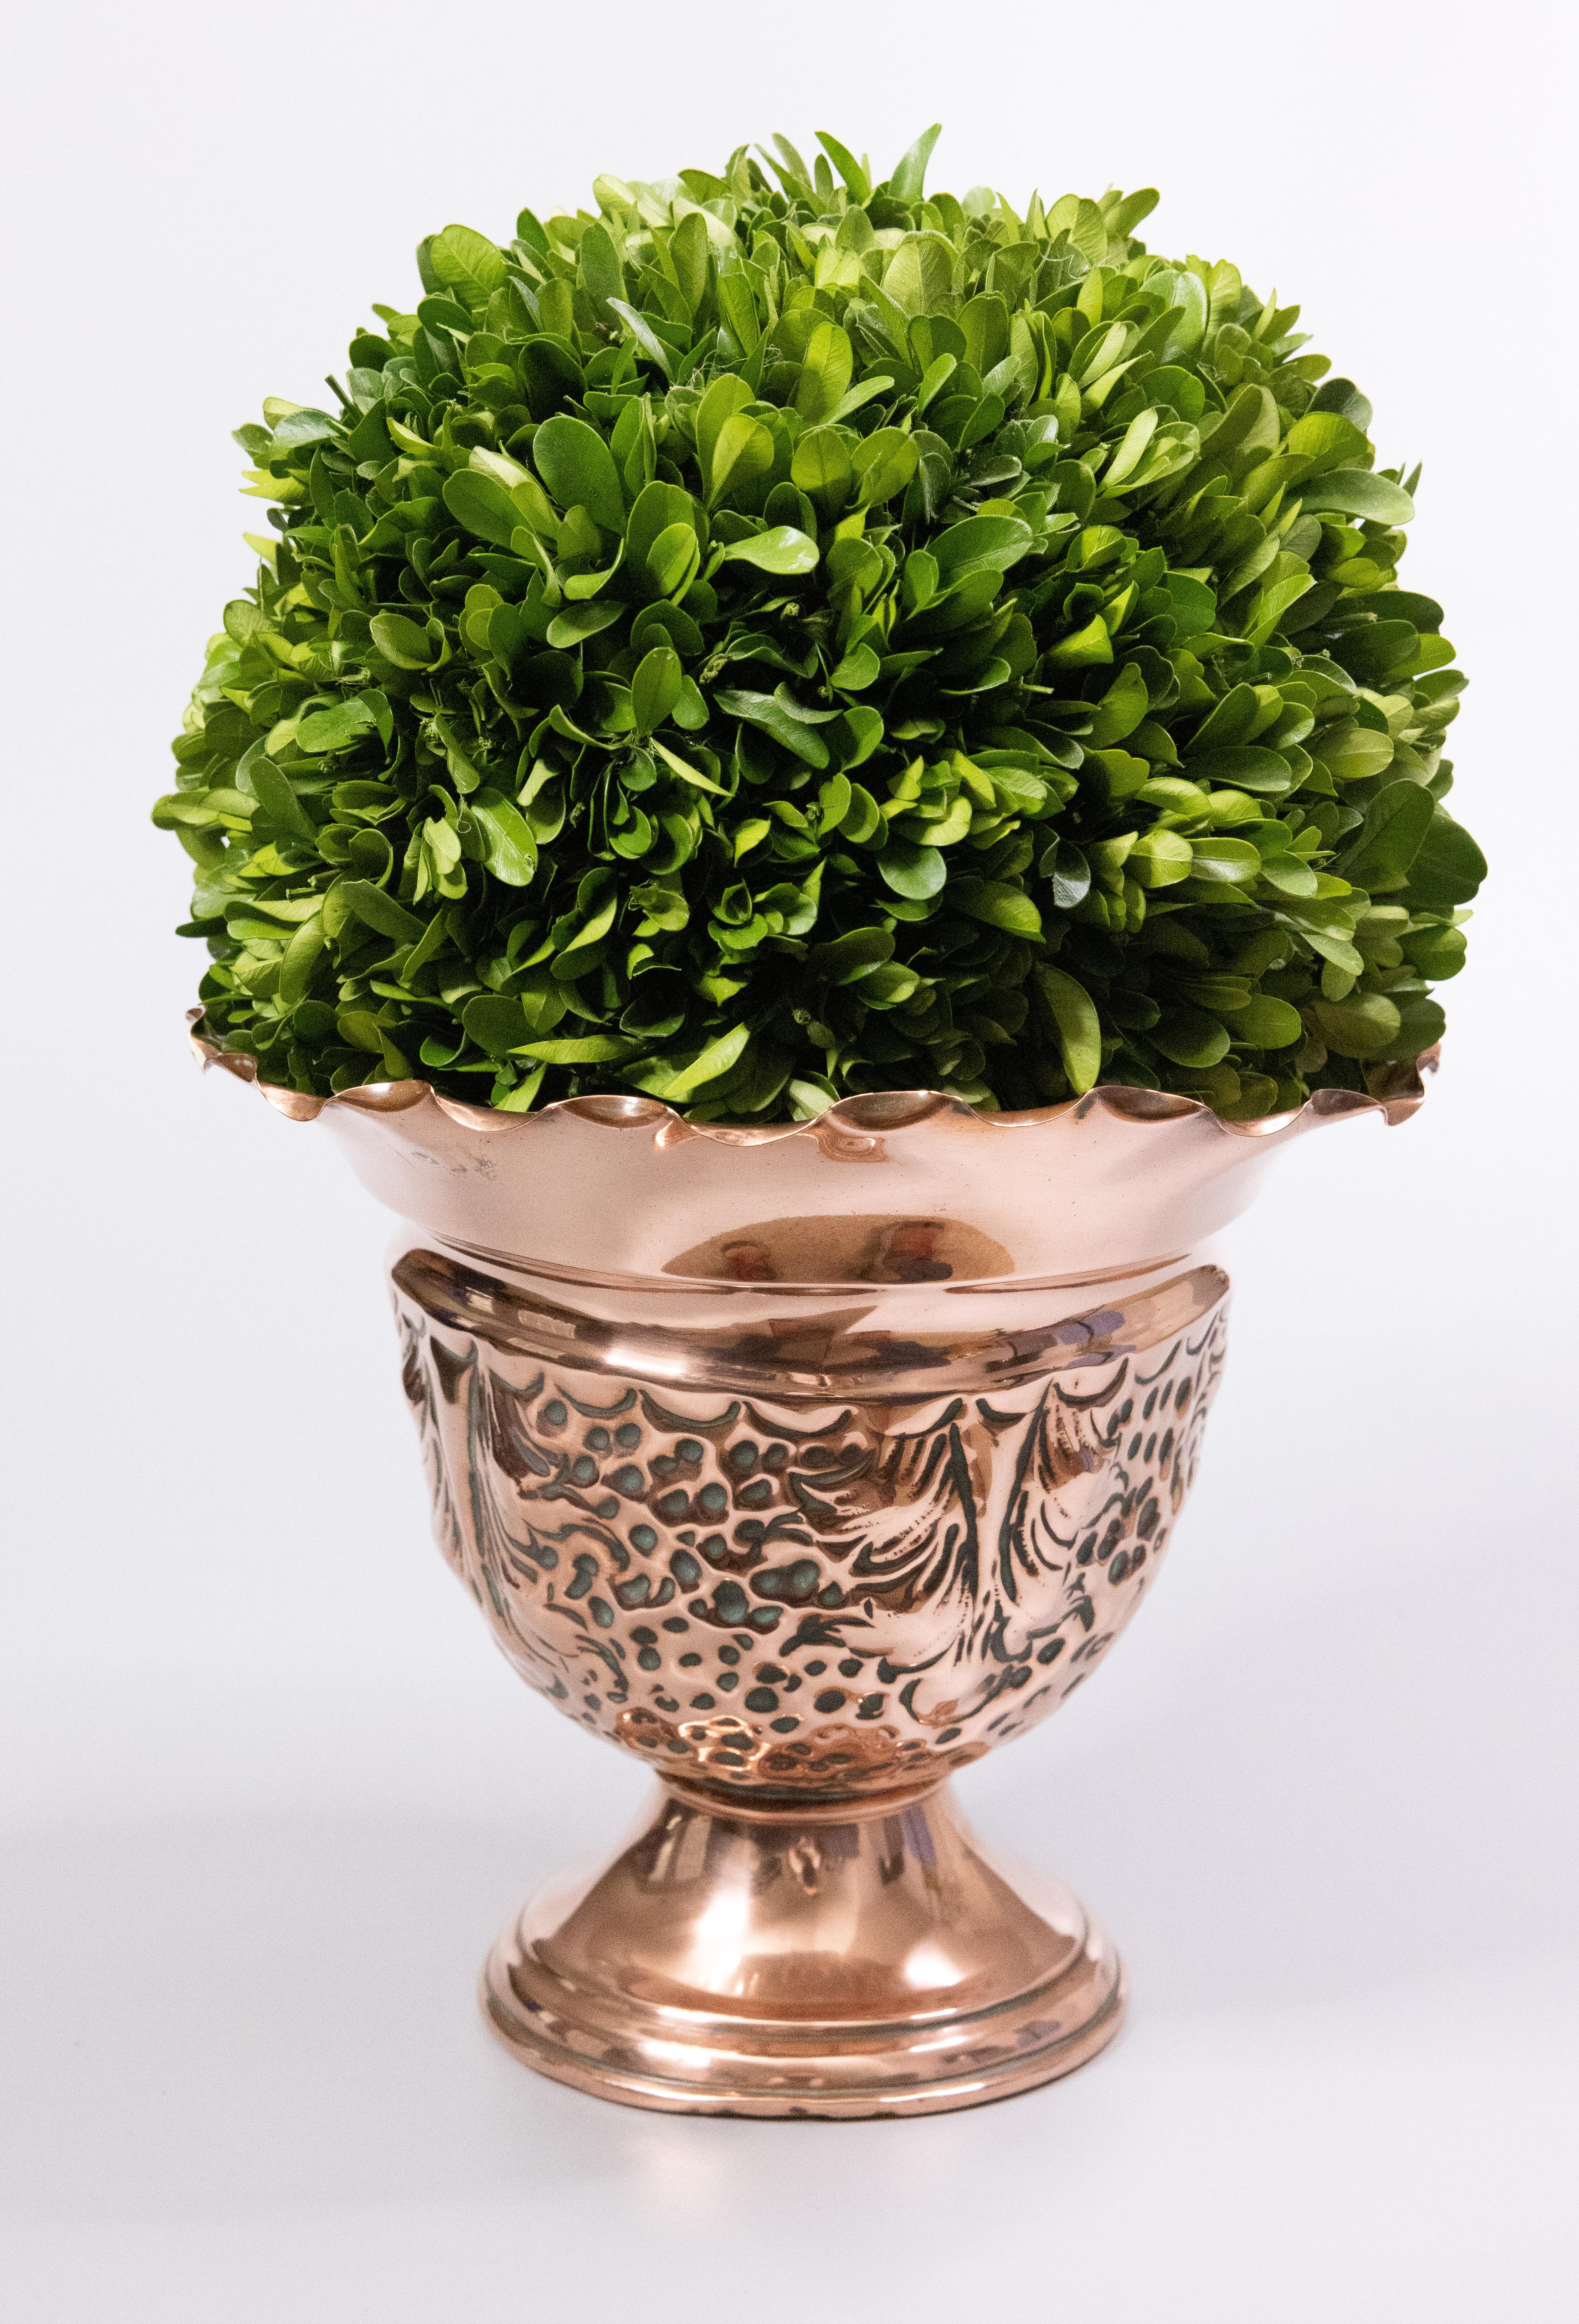 A superb Edwardian English copper jardiniere / cachepot / planter, circa 1910. This beautiful copper planter has a lovely scalloped rim and repoussé design. It has a gorgeous patina and would be beautiful with a plant or displayed with other